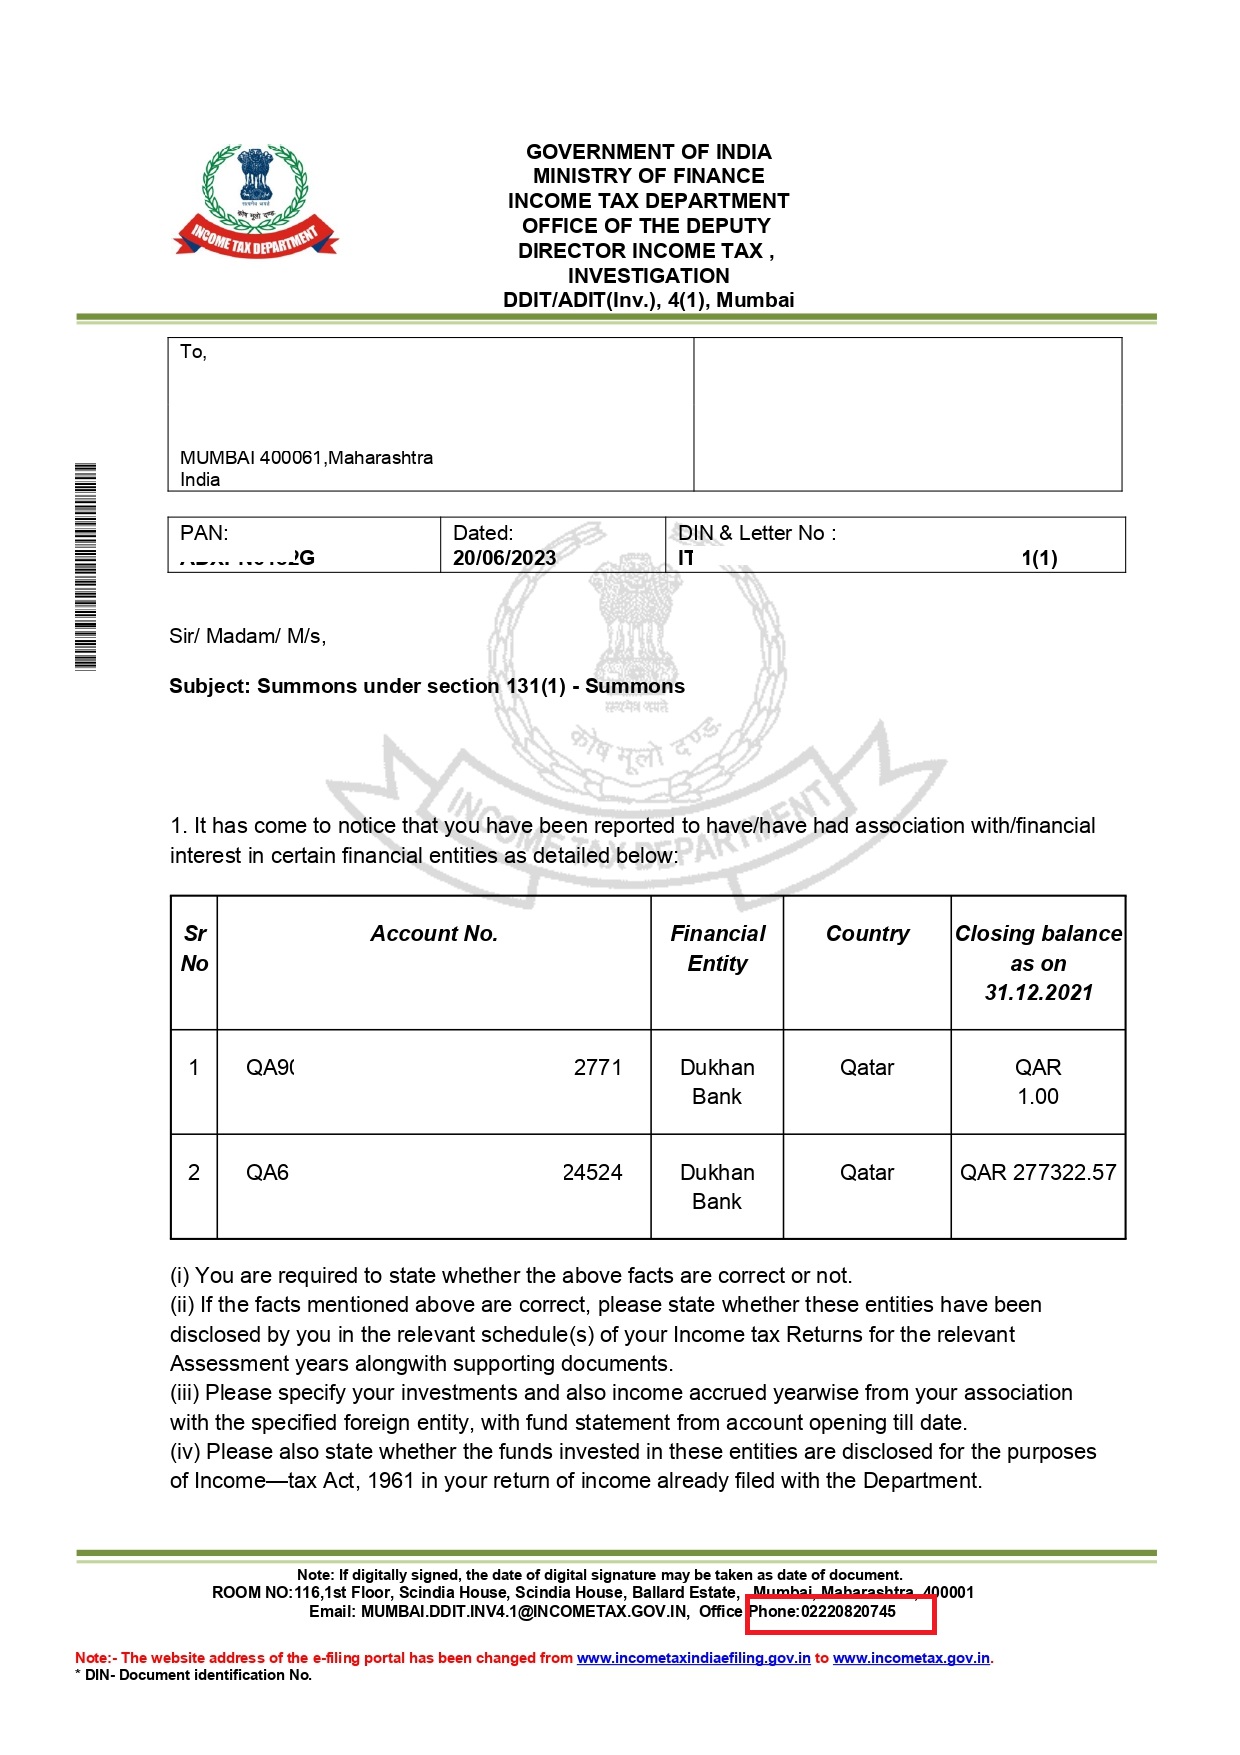 SCAM Alert - Fake Income Tax Notices | NRIs are being targeted with fake income tax notices. See Sample of Fake Notice received by our client. Also read how to authenticate Notice/Order Issued by ITD | Income Tax Notices | 142(1) | 143(3) Assessment | 143(2) Notice | 144 Assessment | 148 Notice | 147 Assessment | Crypto CA | Coinsecure Notice | notices to cryptocurrency investors